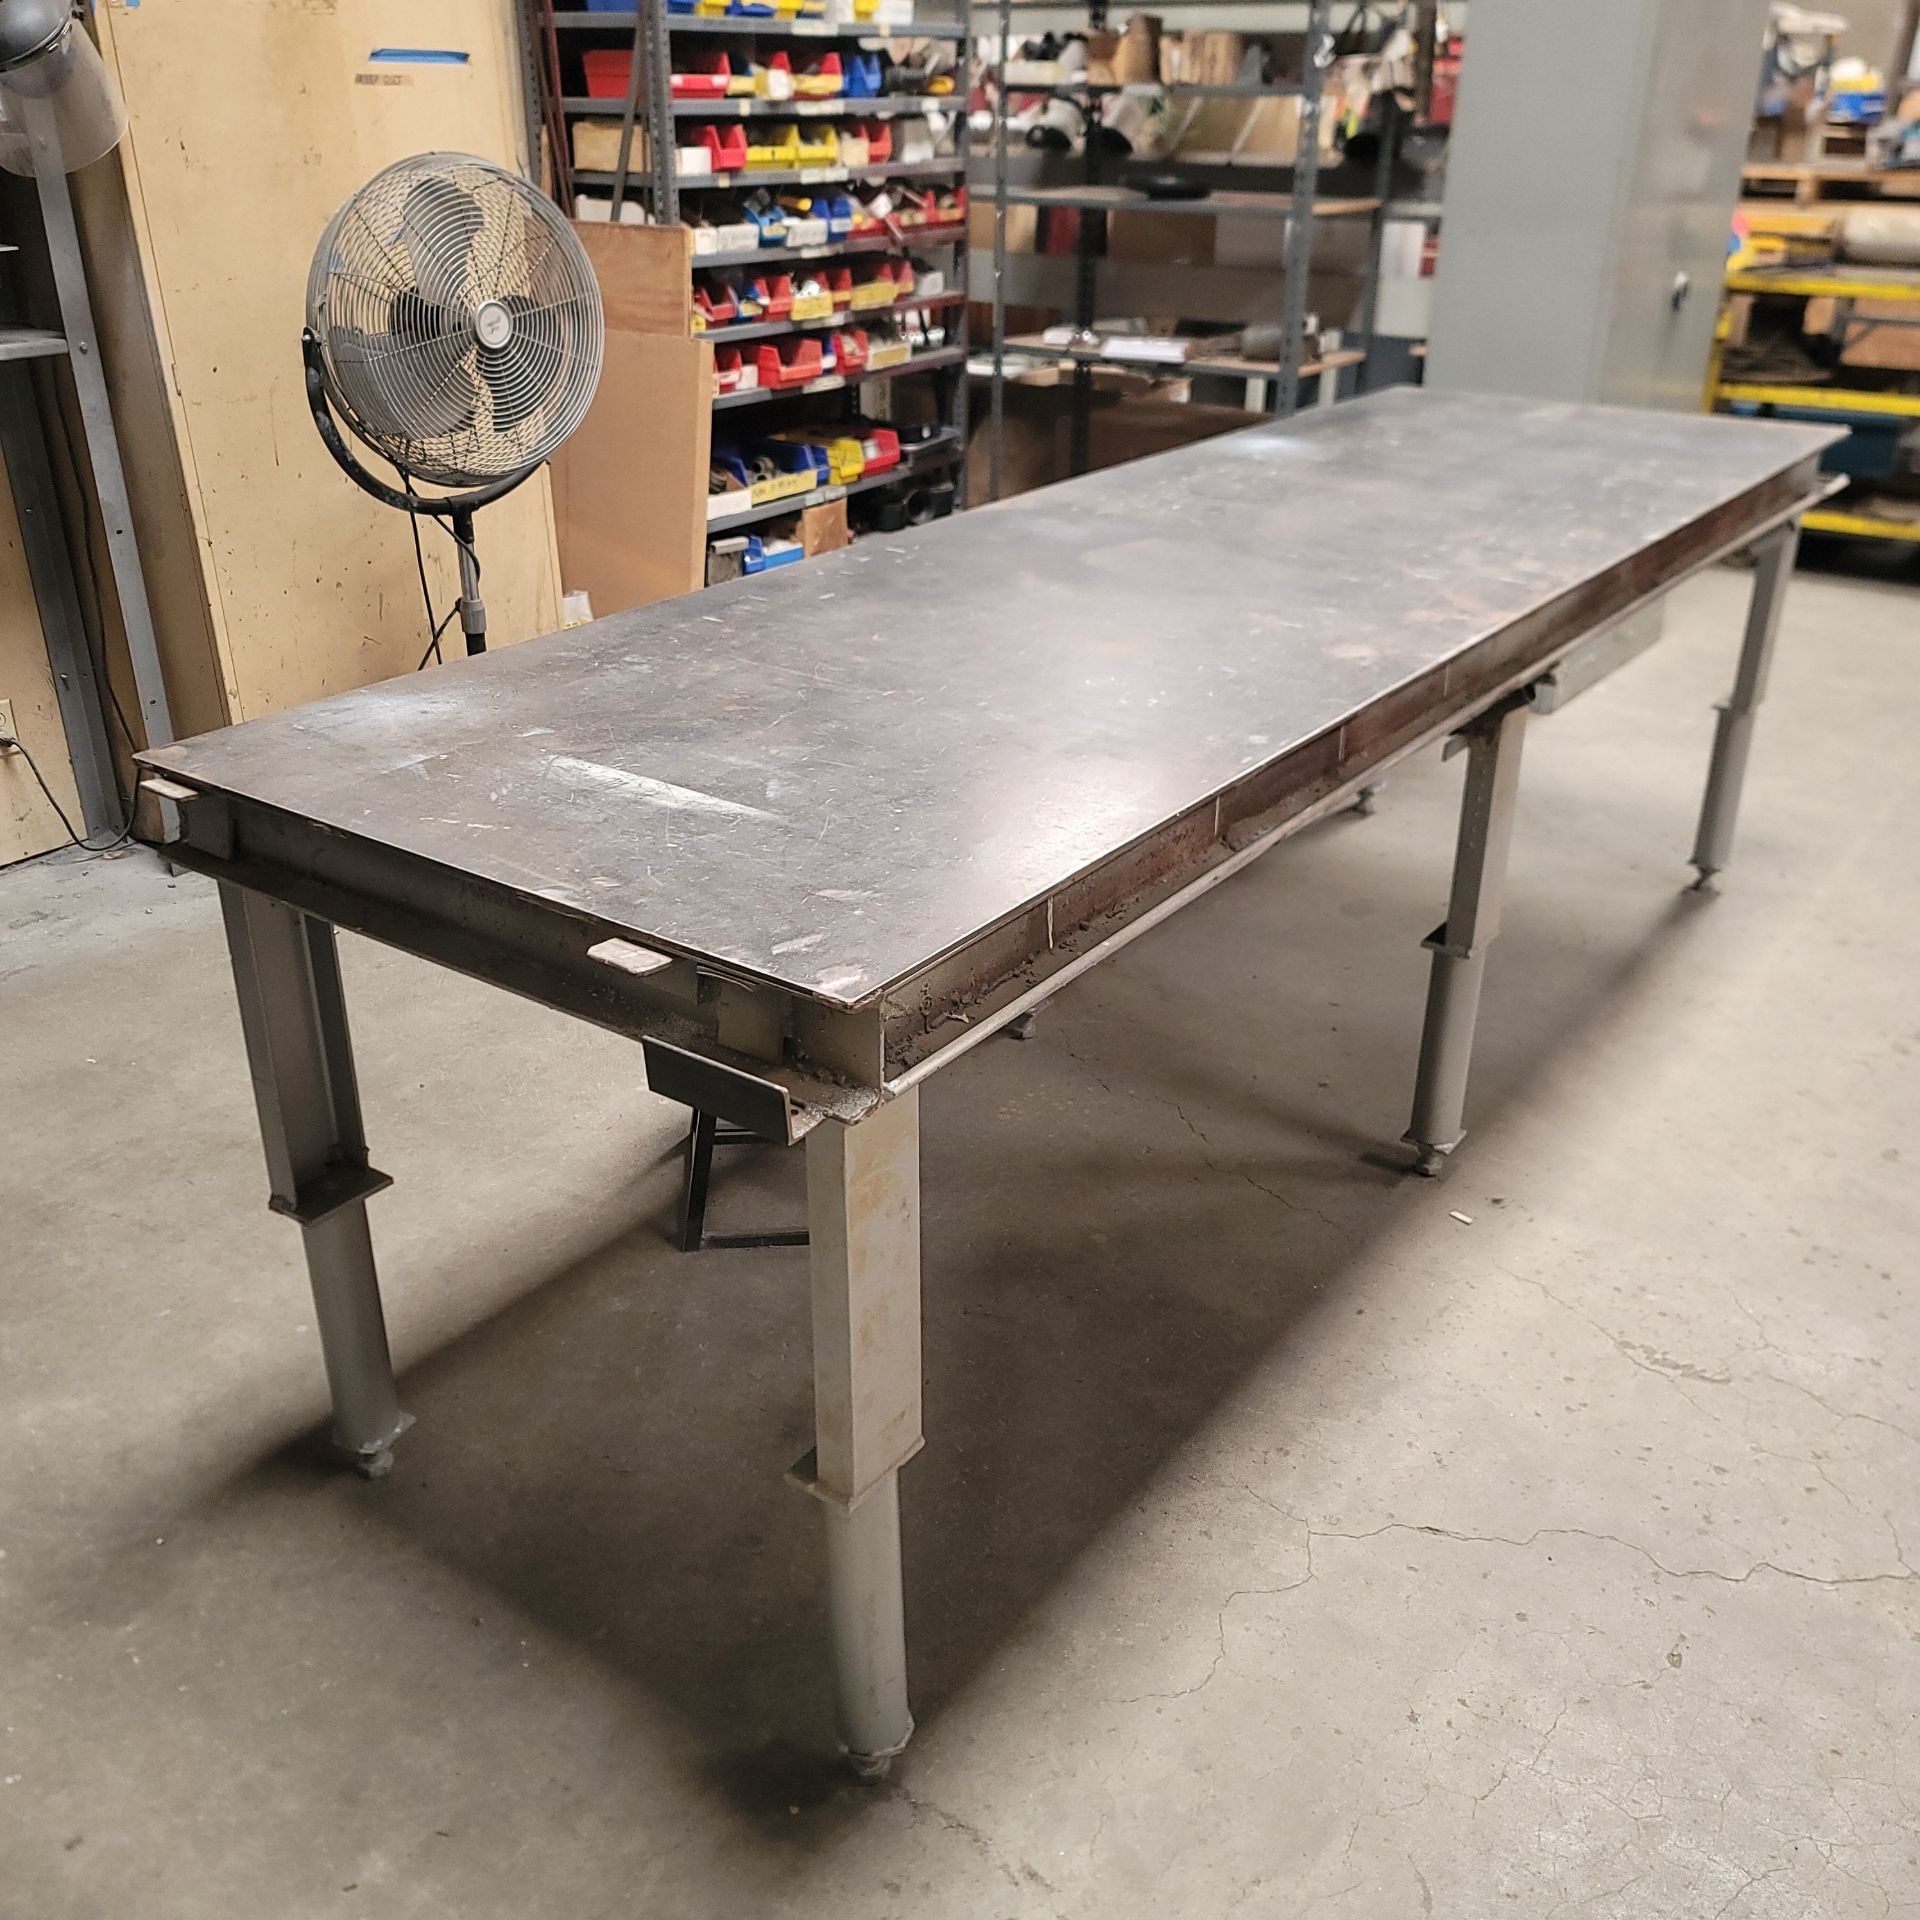 WELDING TABLE W/ 10' X 3' X 1/4" THICK TOP, 37" WORK HEIGHT, (6) HEIGHT ADJUSTABLE LEGS, W/ STEEL - Image 2 of 2